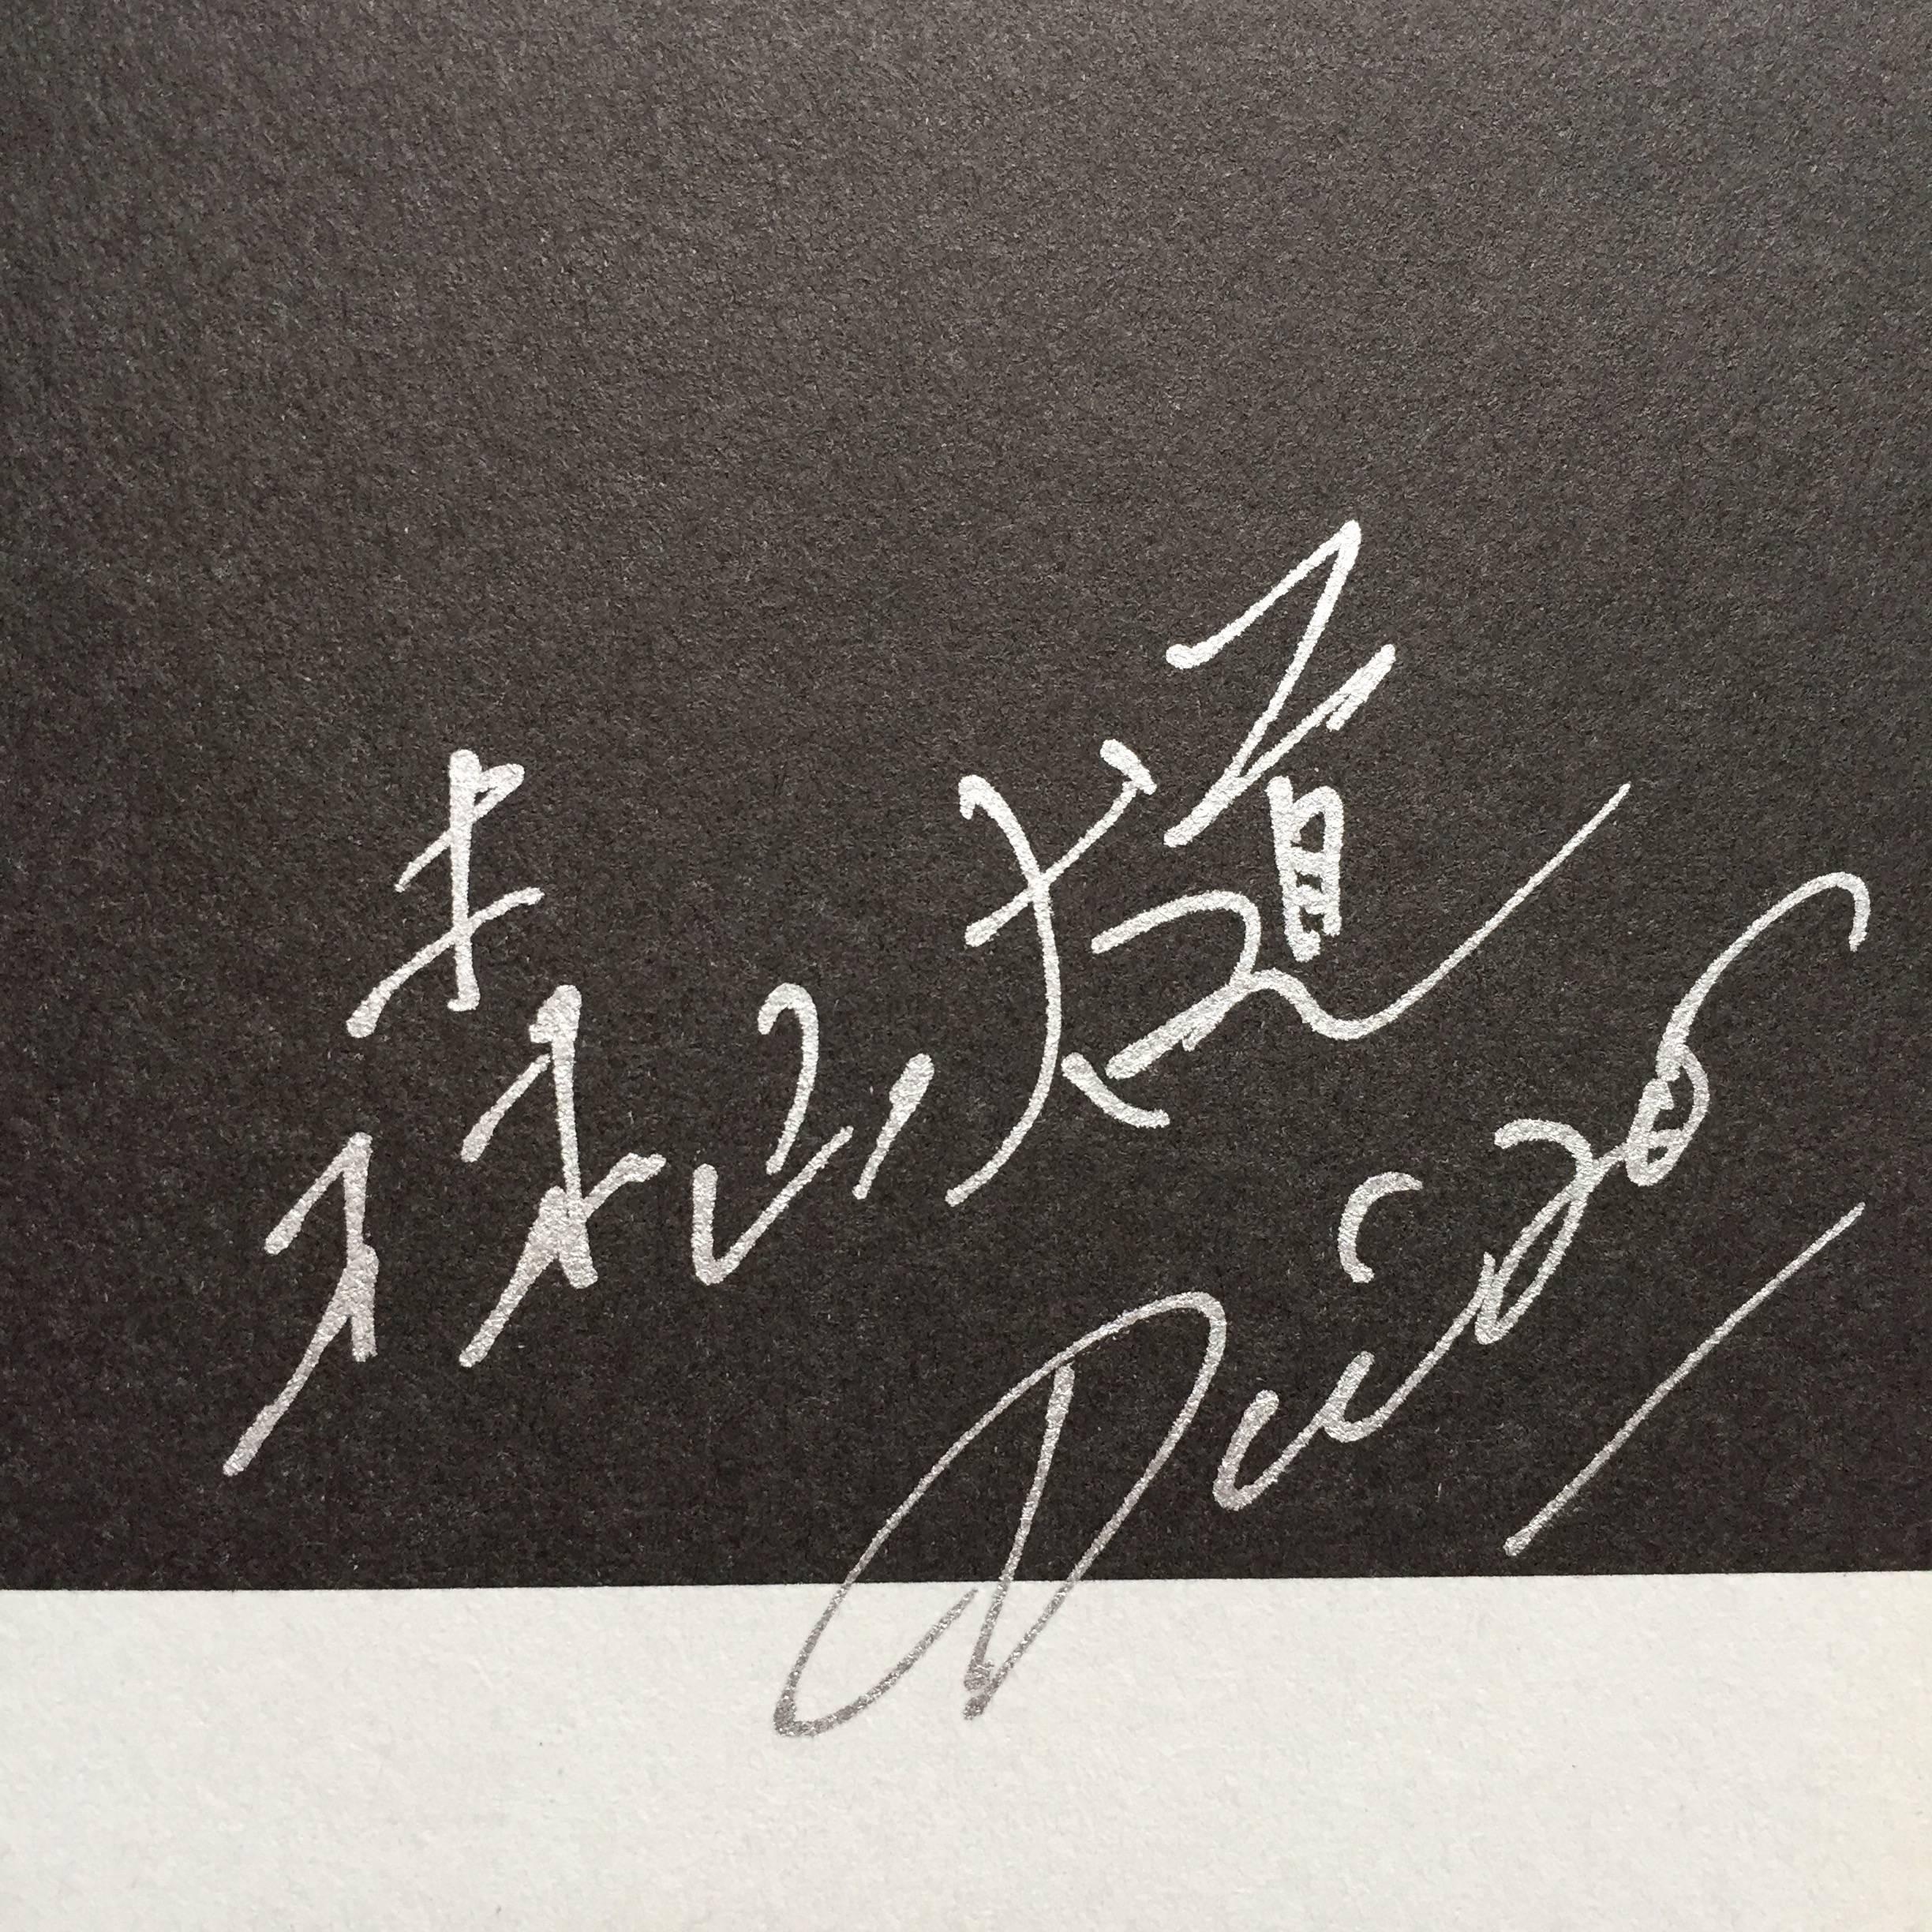 Signed First Edition, published by Kodansha, Japan, 2009.

Signed by Daido Moriyama at the title page, this small ‘bunko’ format photobook, with its original Obi strip, is a beautiful republication in a new form of Moriyama’s sought after 1982 book